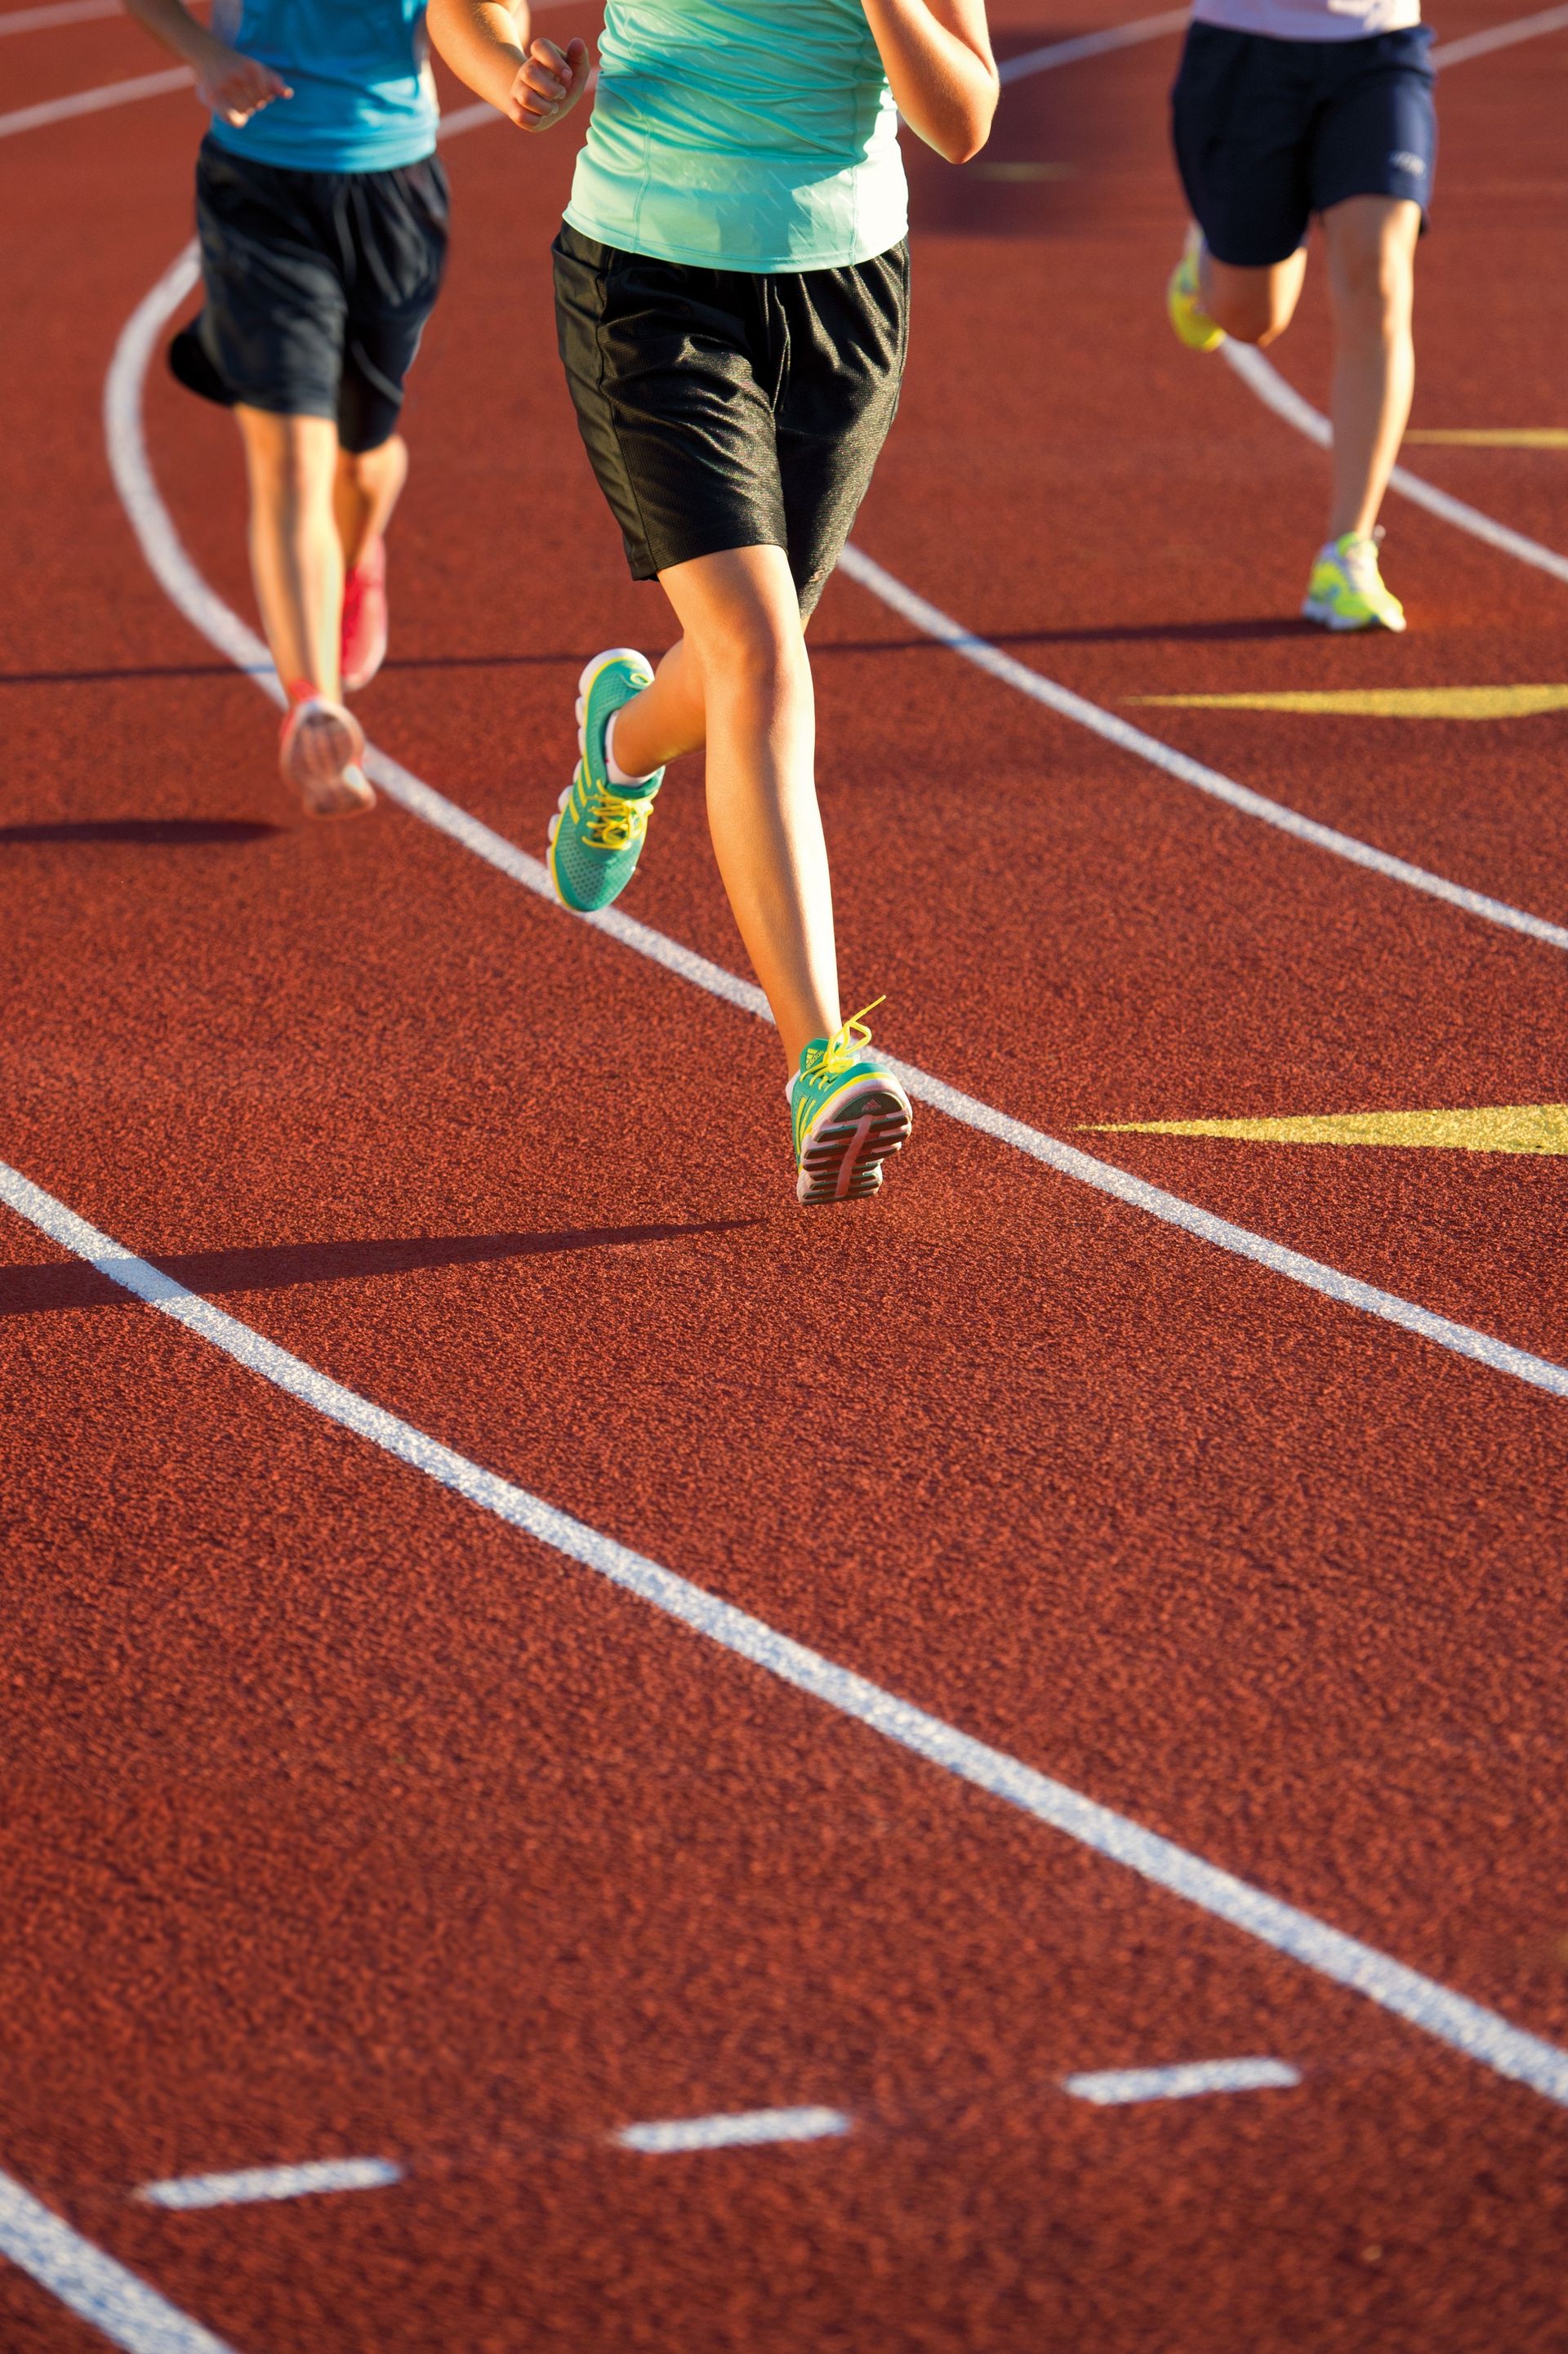 Runners race on a track.